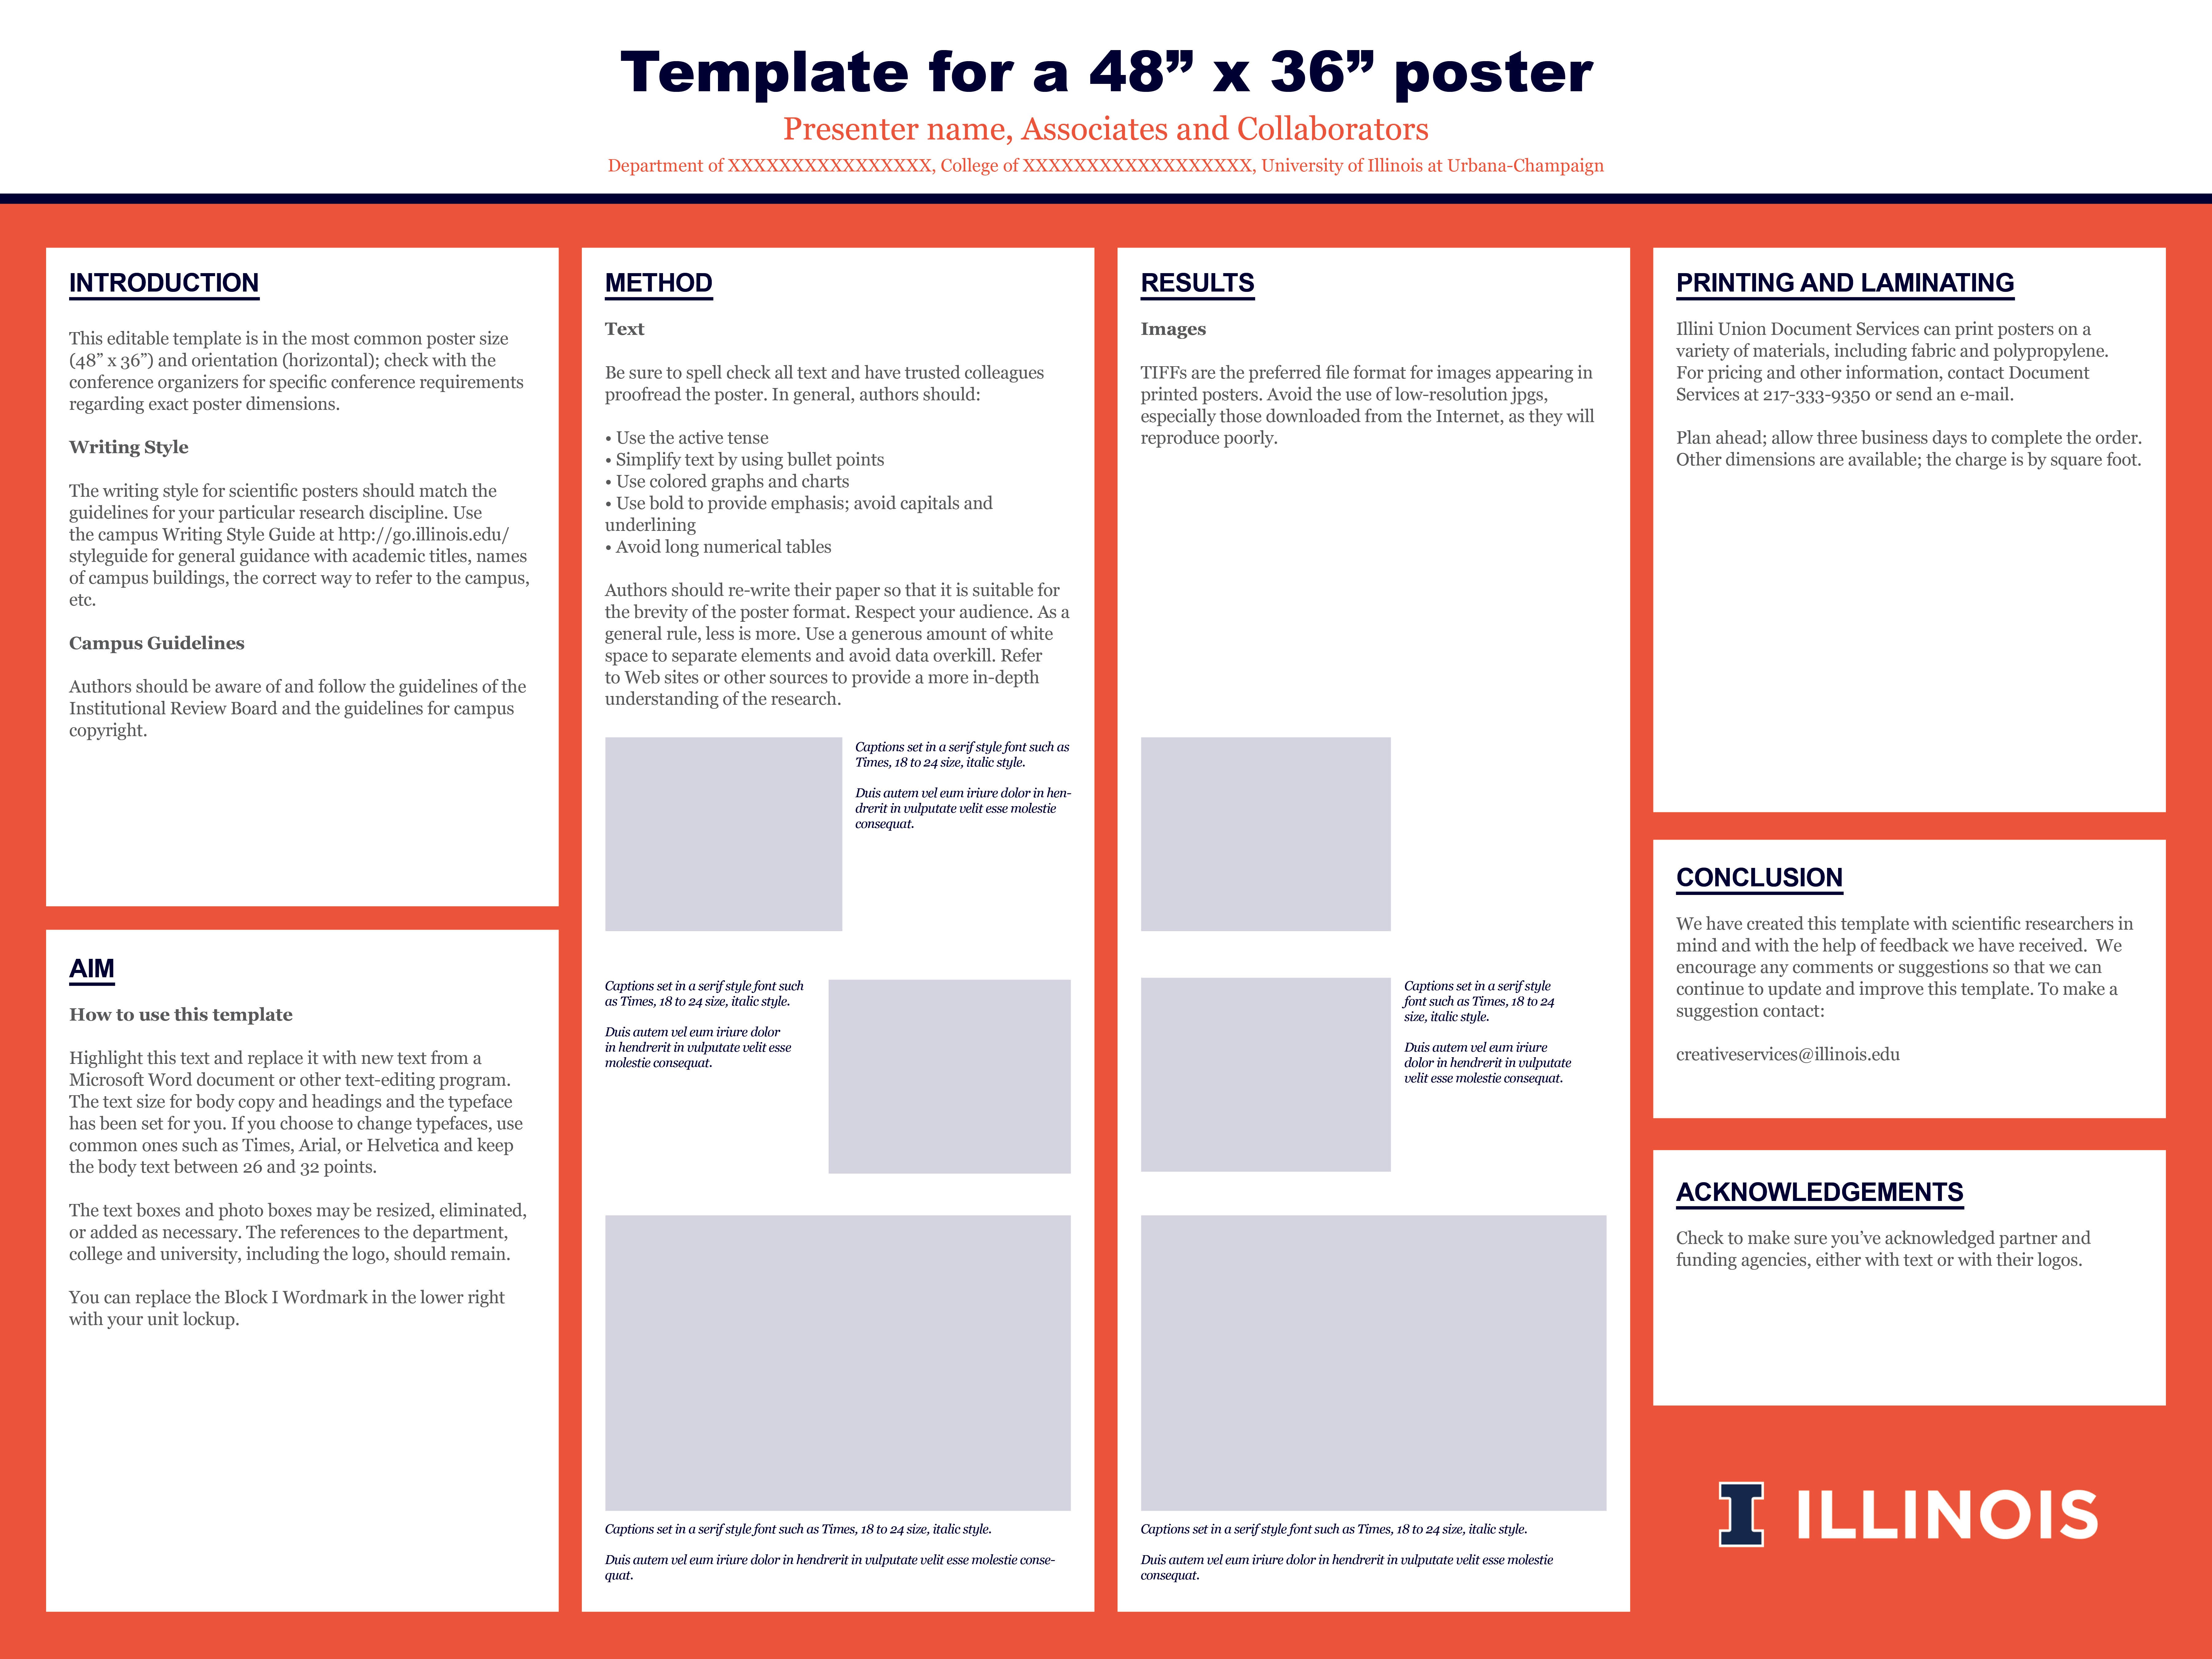 Research Poster Campus Templates Public Affairs Illinois Chemistry Template